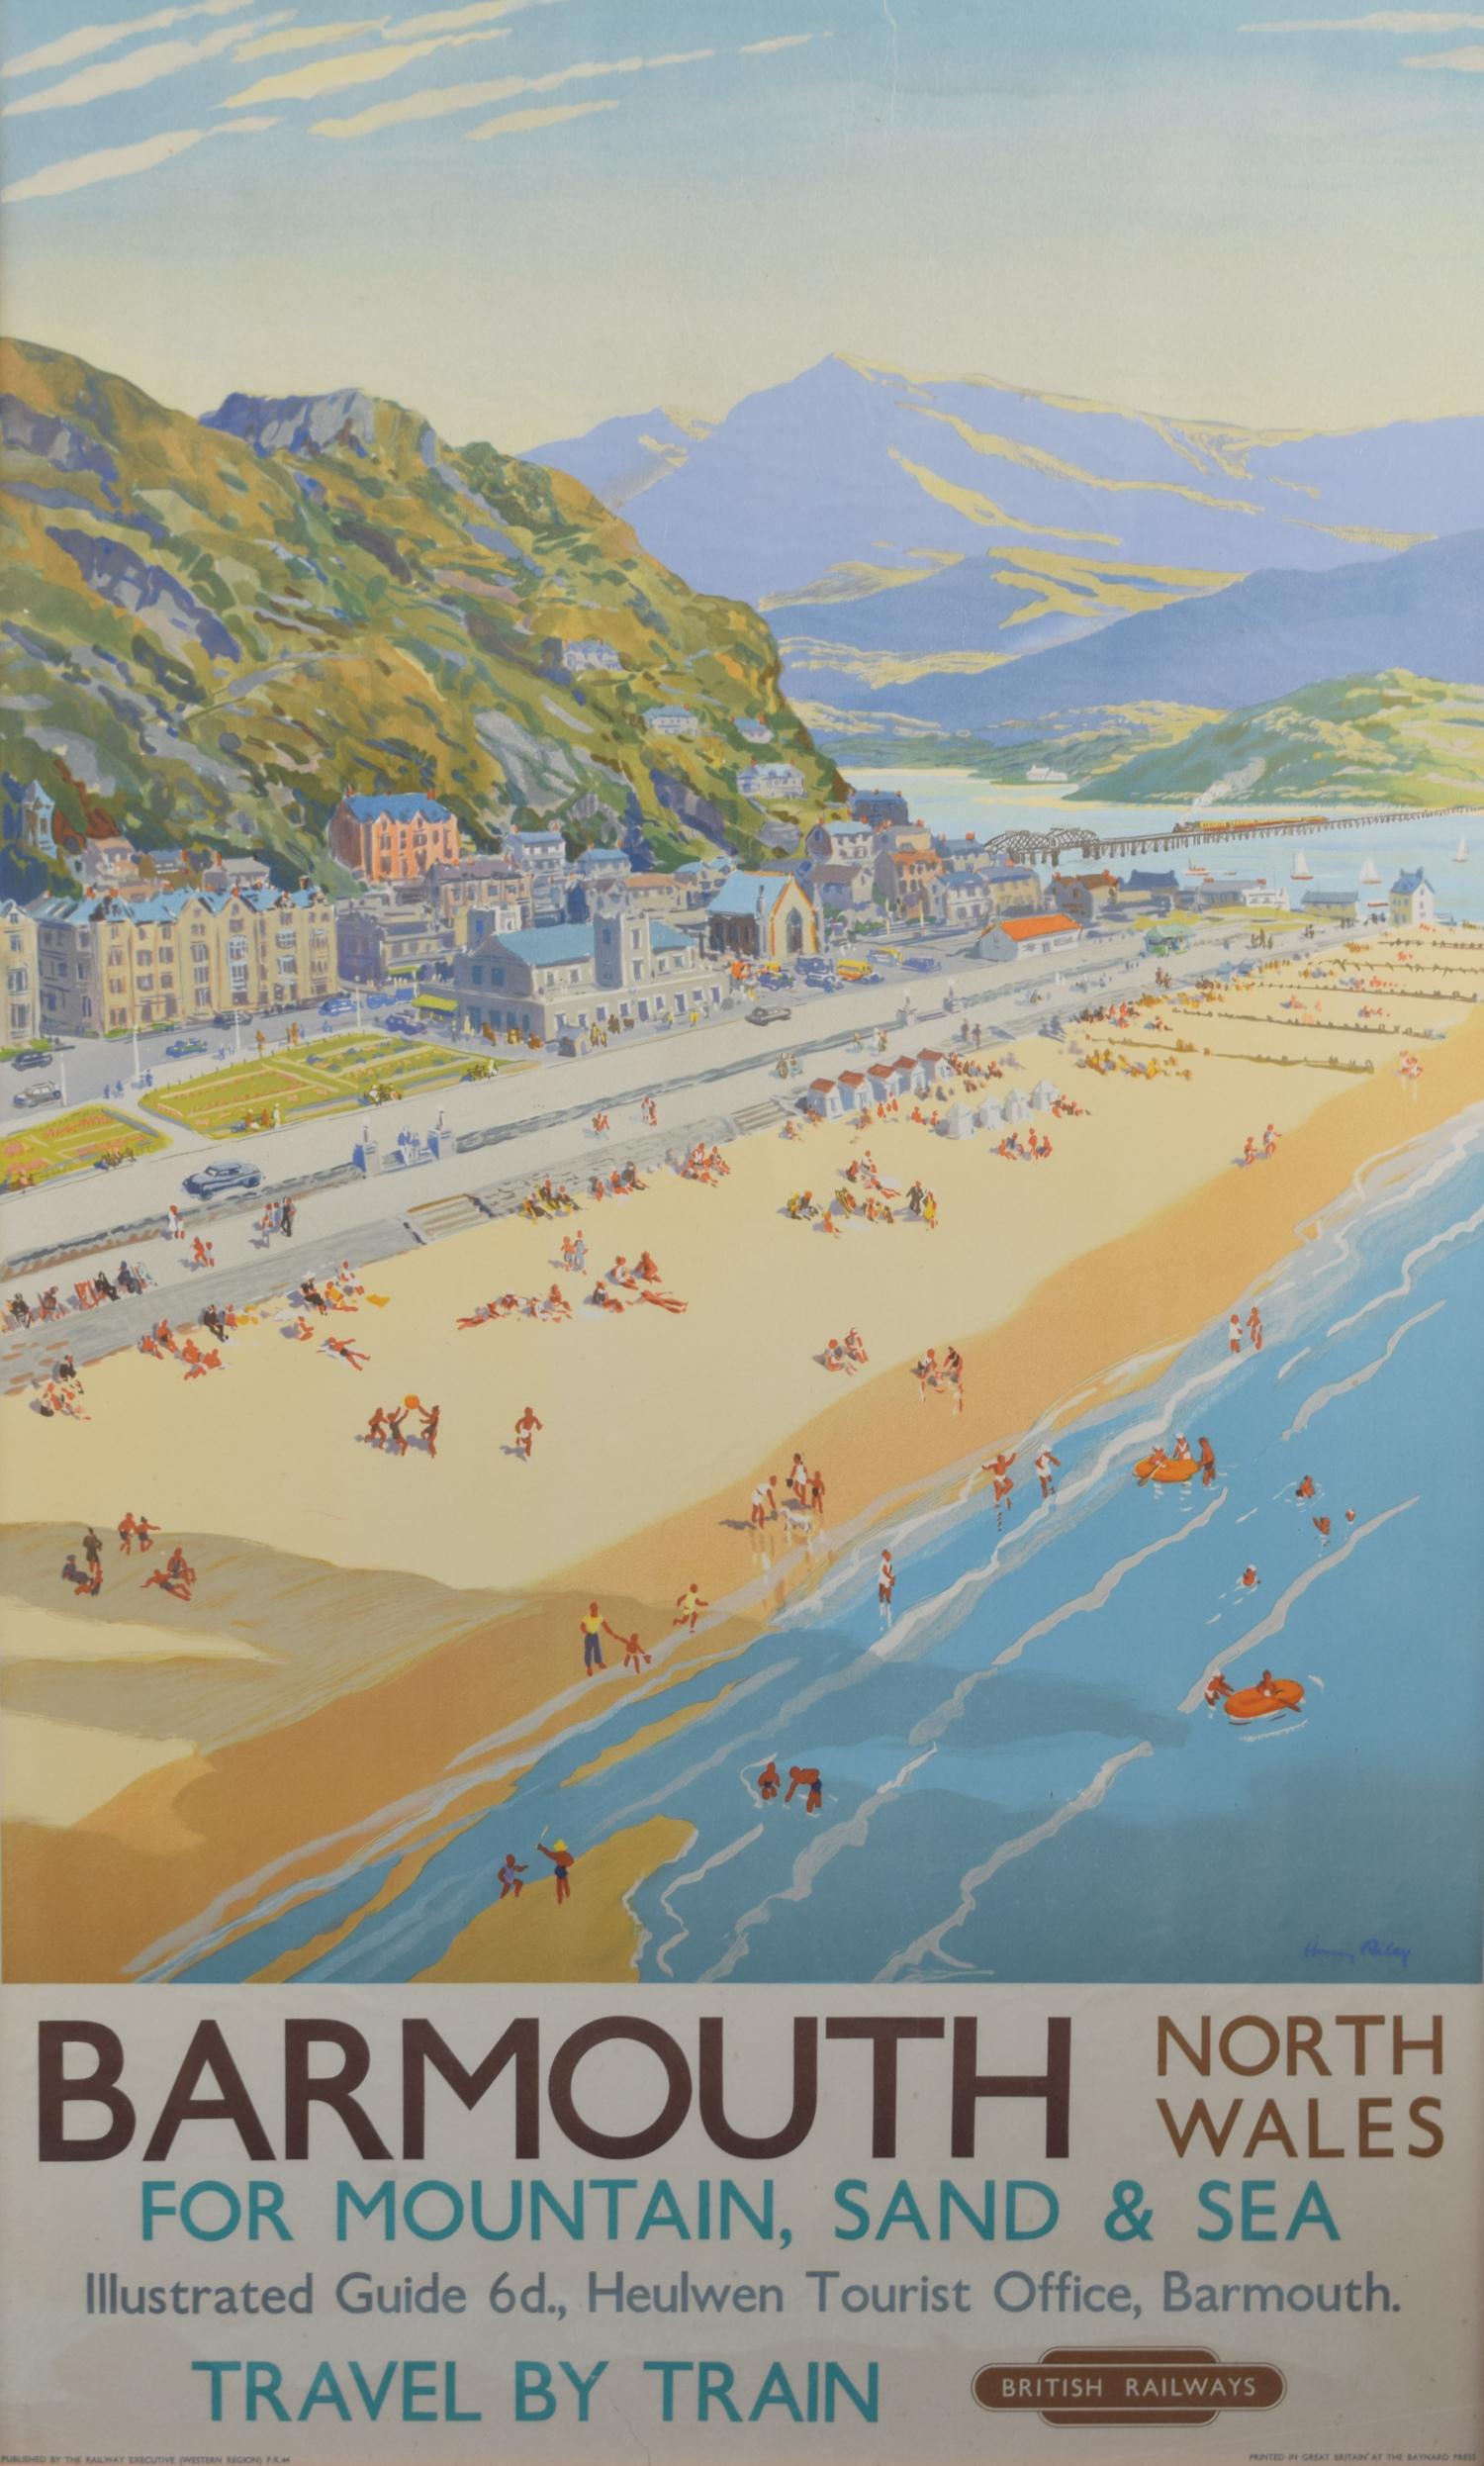 To see our other original vintage travel posters, scroll down to "More from this Seller" and below it click on "See all from this Seller" - or send us a message if you cannot find the poster you want.

Harry Arthur Riley (1895 - 1966)
Barmouth,